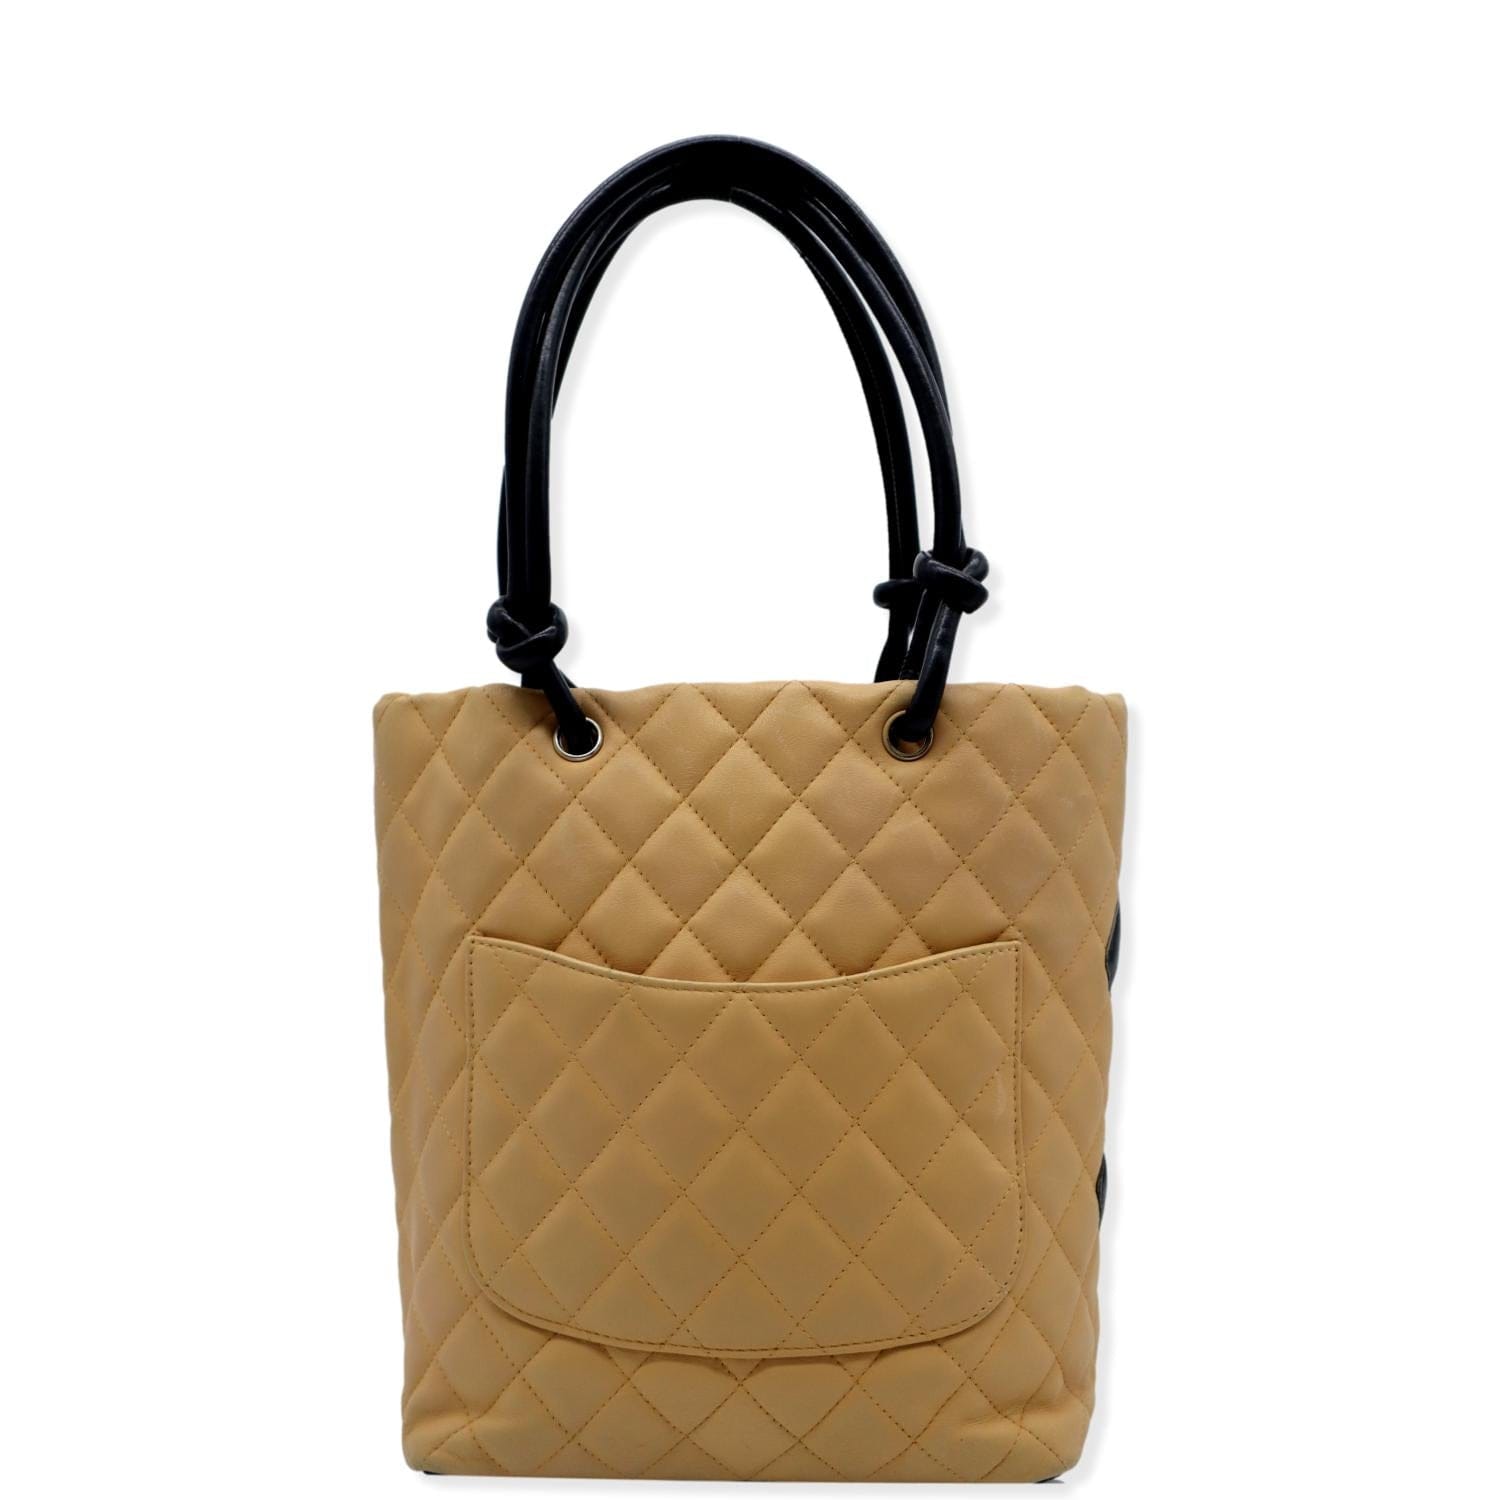 CHANEL Calf Leather Cambon Ligne Brown Quilted Tote Bag Handbag #2499  Rise-on